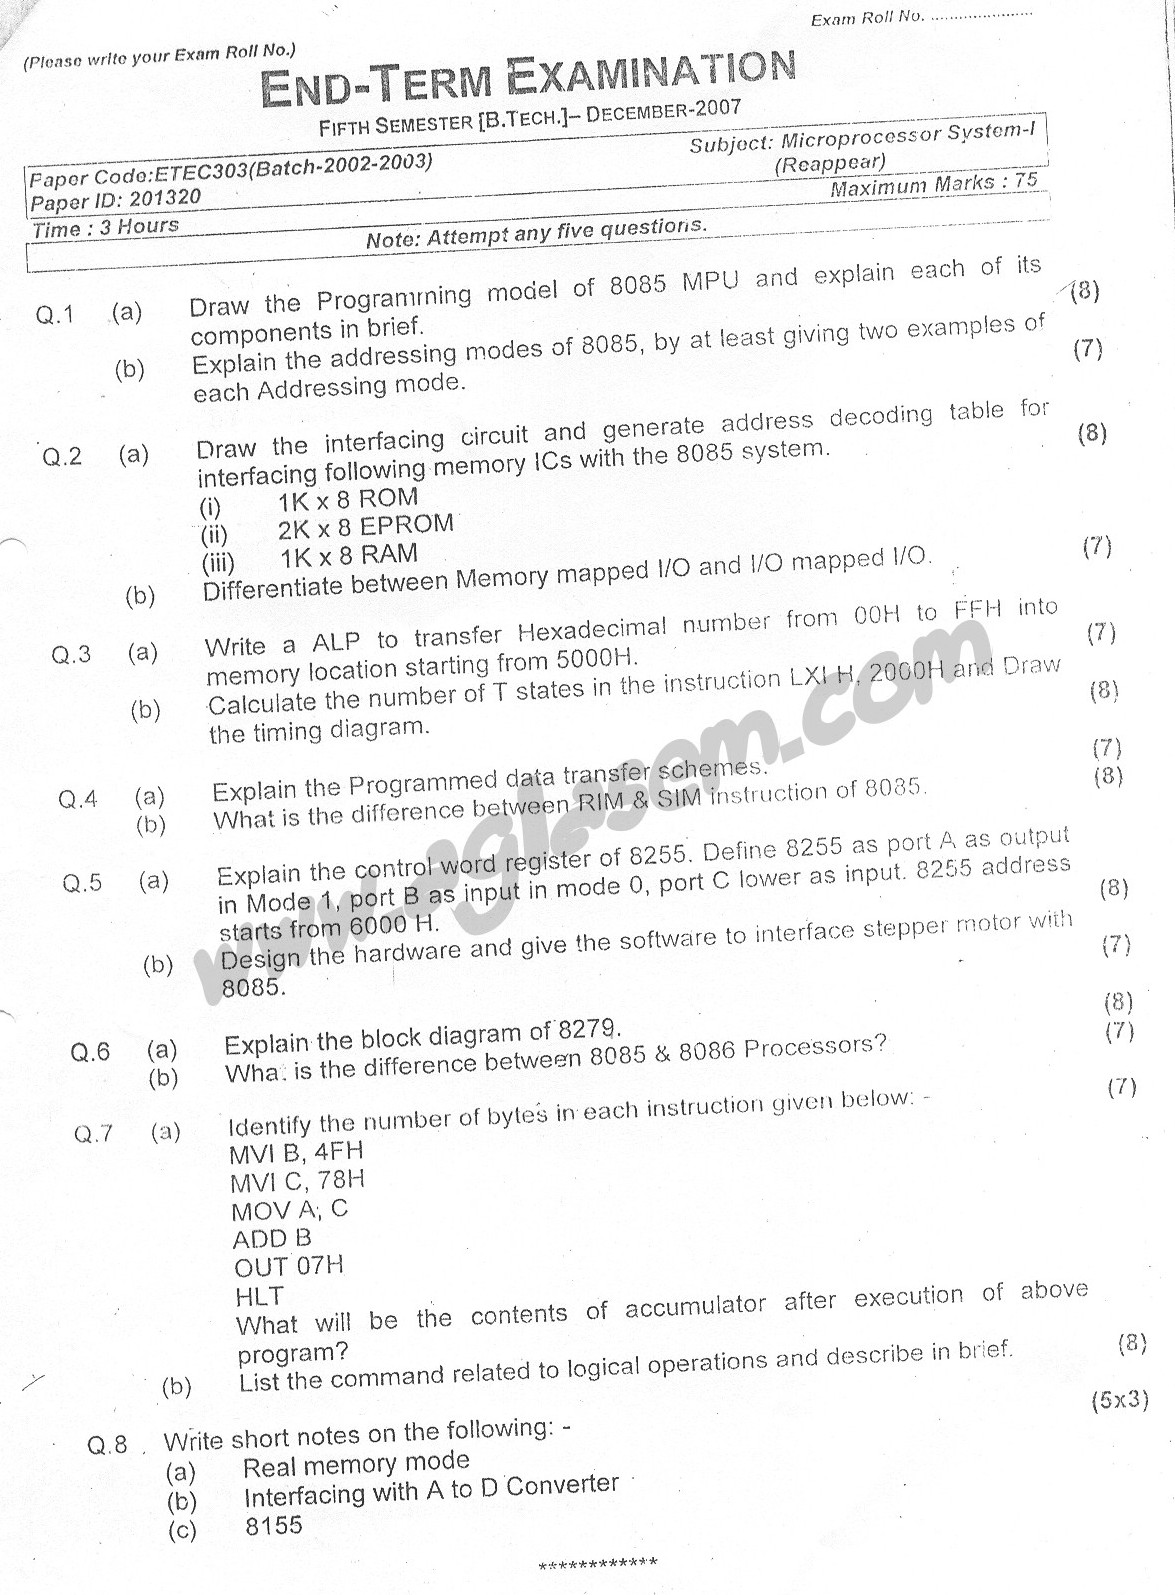 GGSIPU Question Papers Fifth Semester  Second Term 2005  ETEC-303